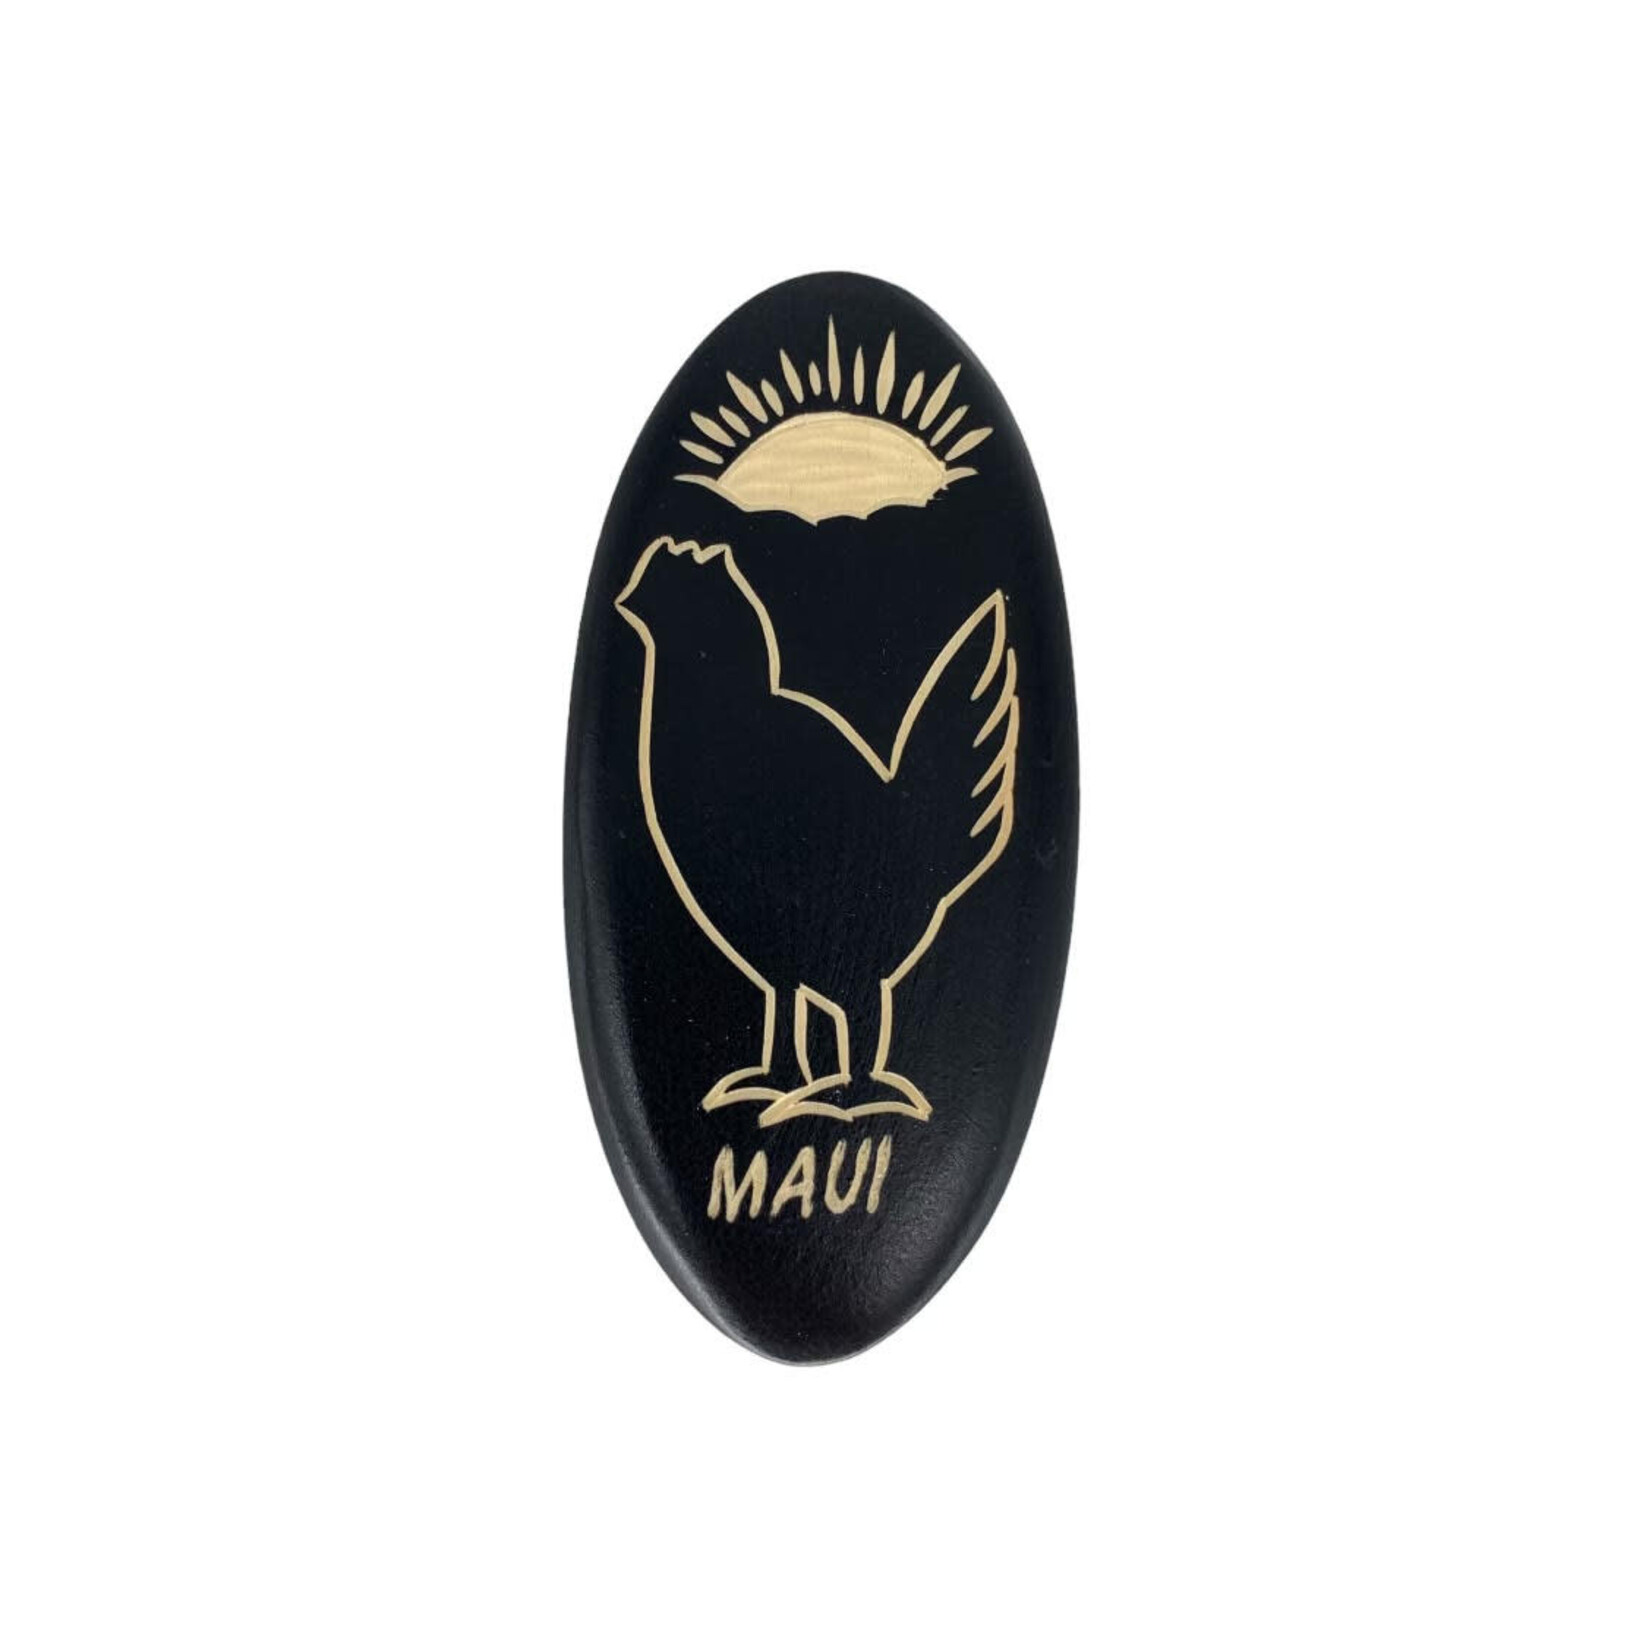 Hand Carved Magnet, Pack of 10 Maui Chicken